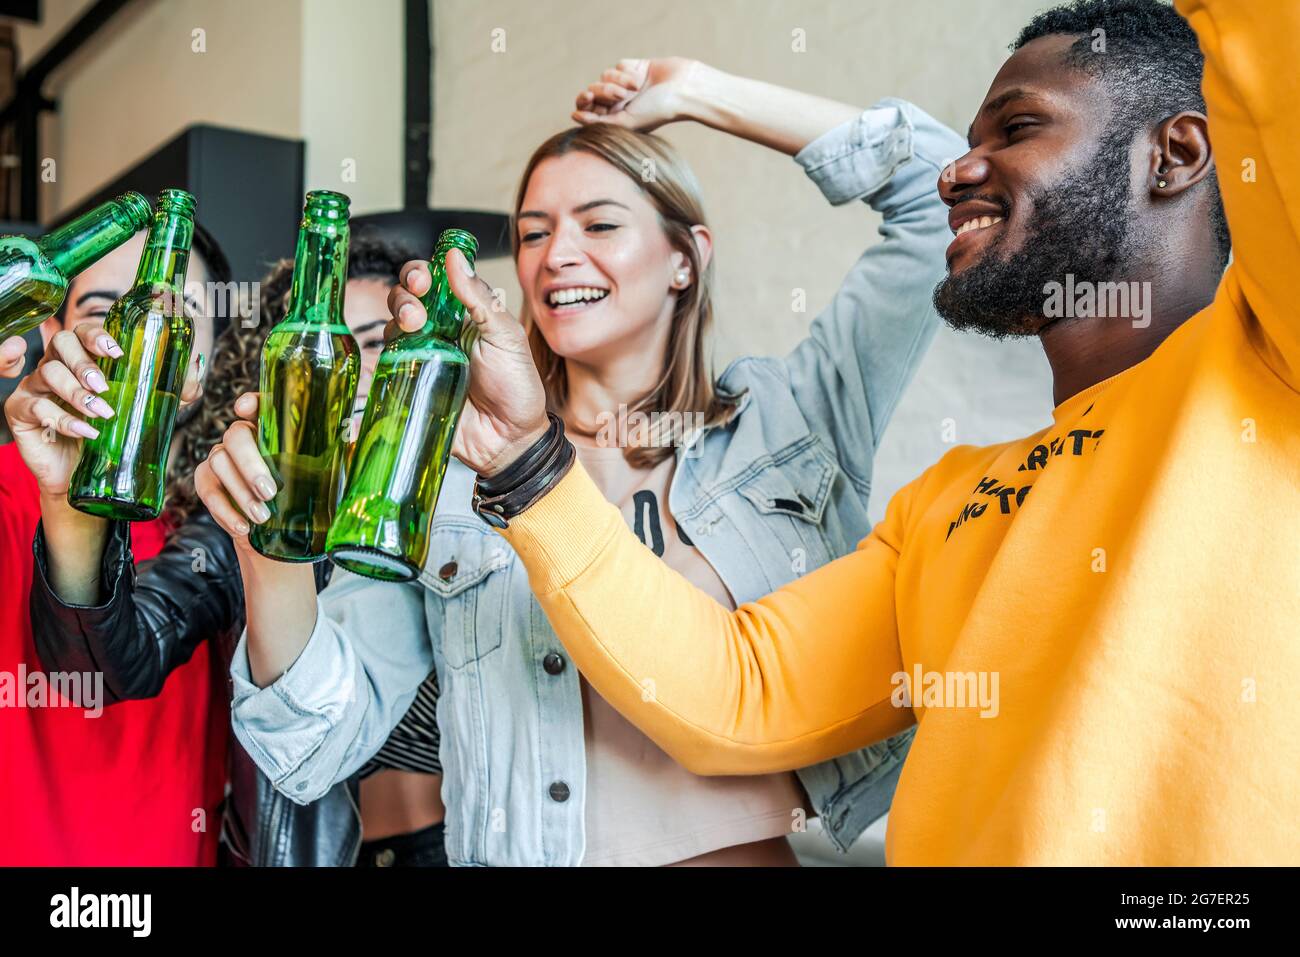 Friends having fun while drinking beer together. Stock Photo